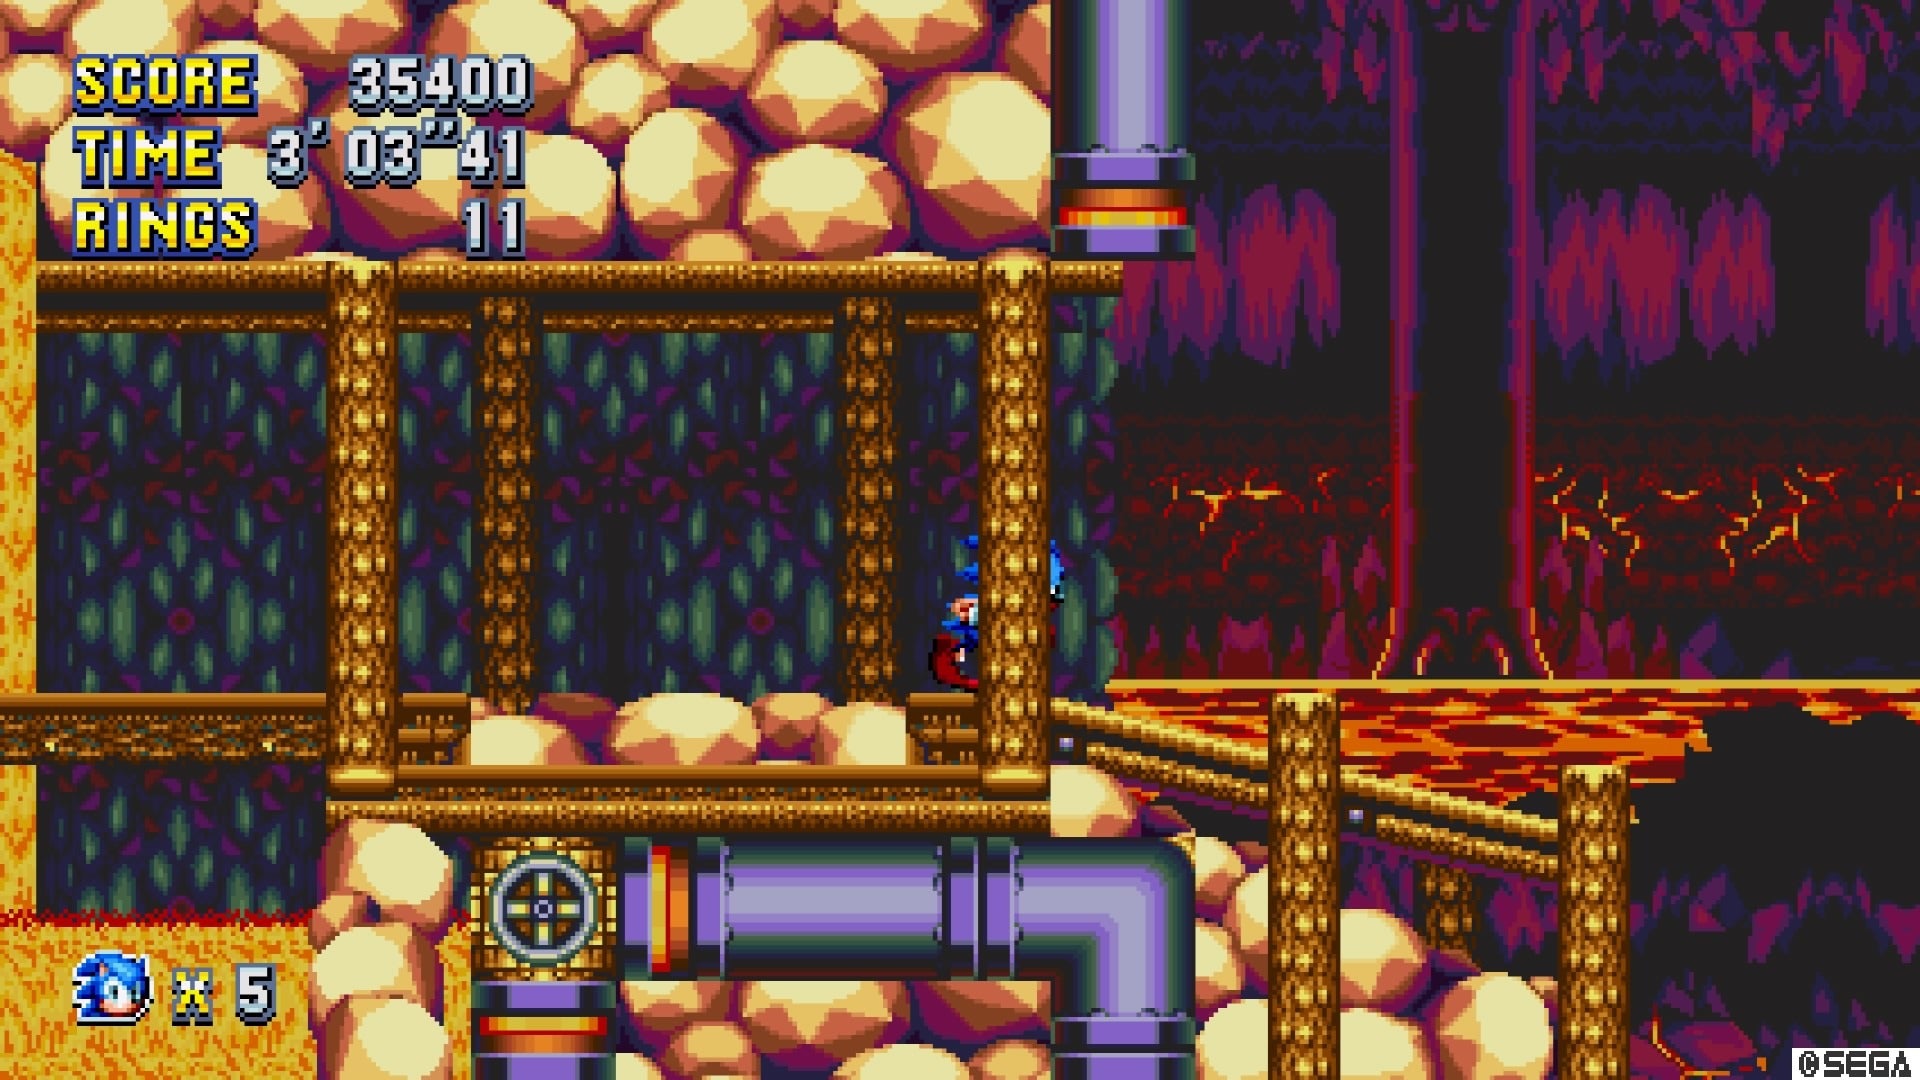 Sonic Mania gameplay screenshot with score and time display.